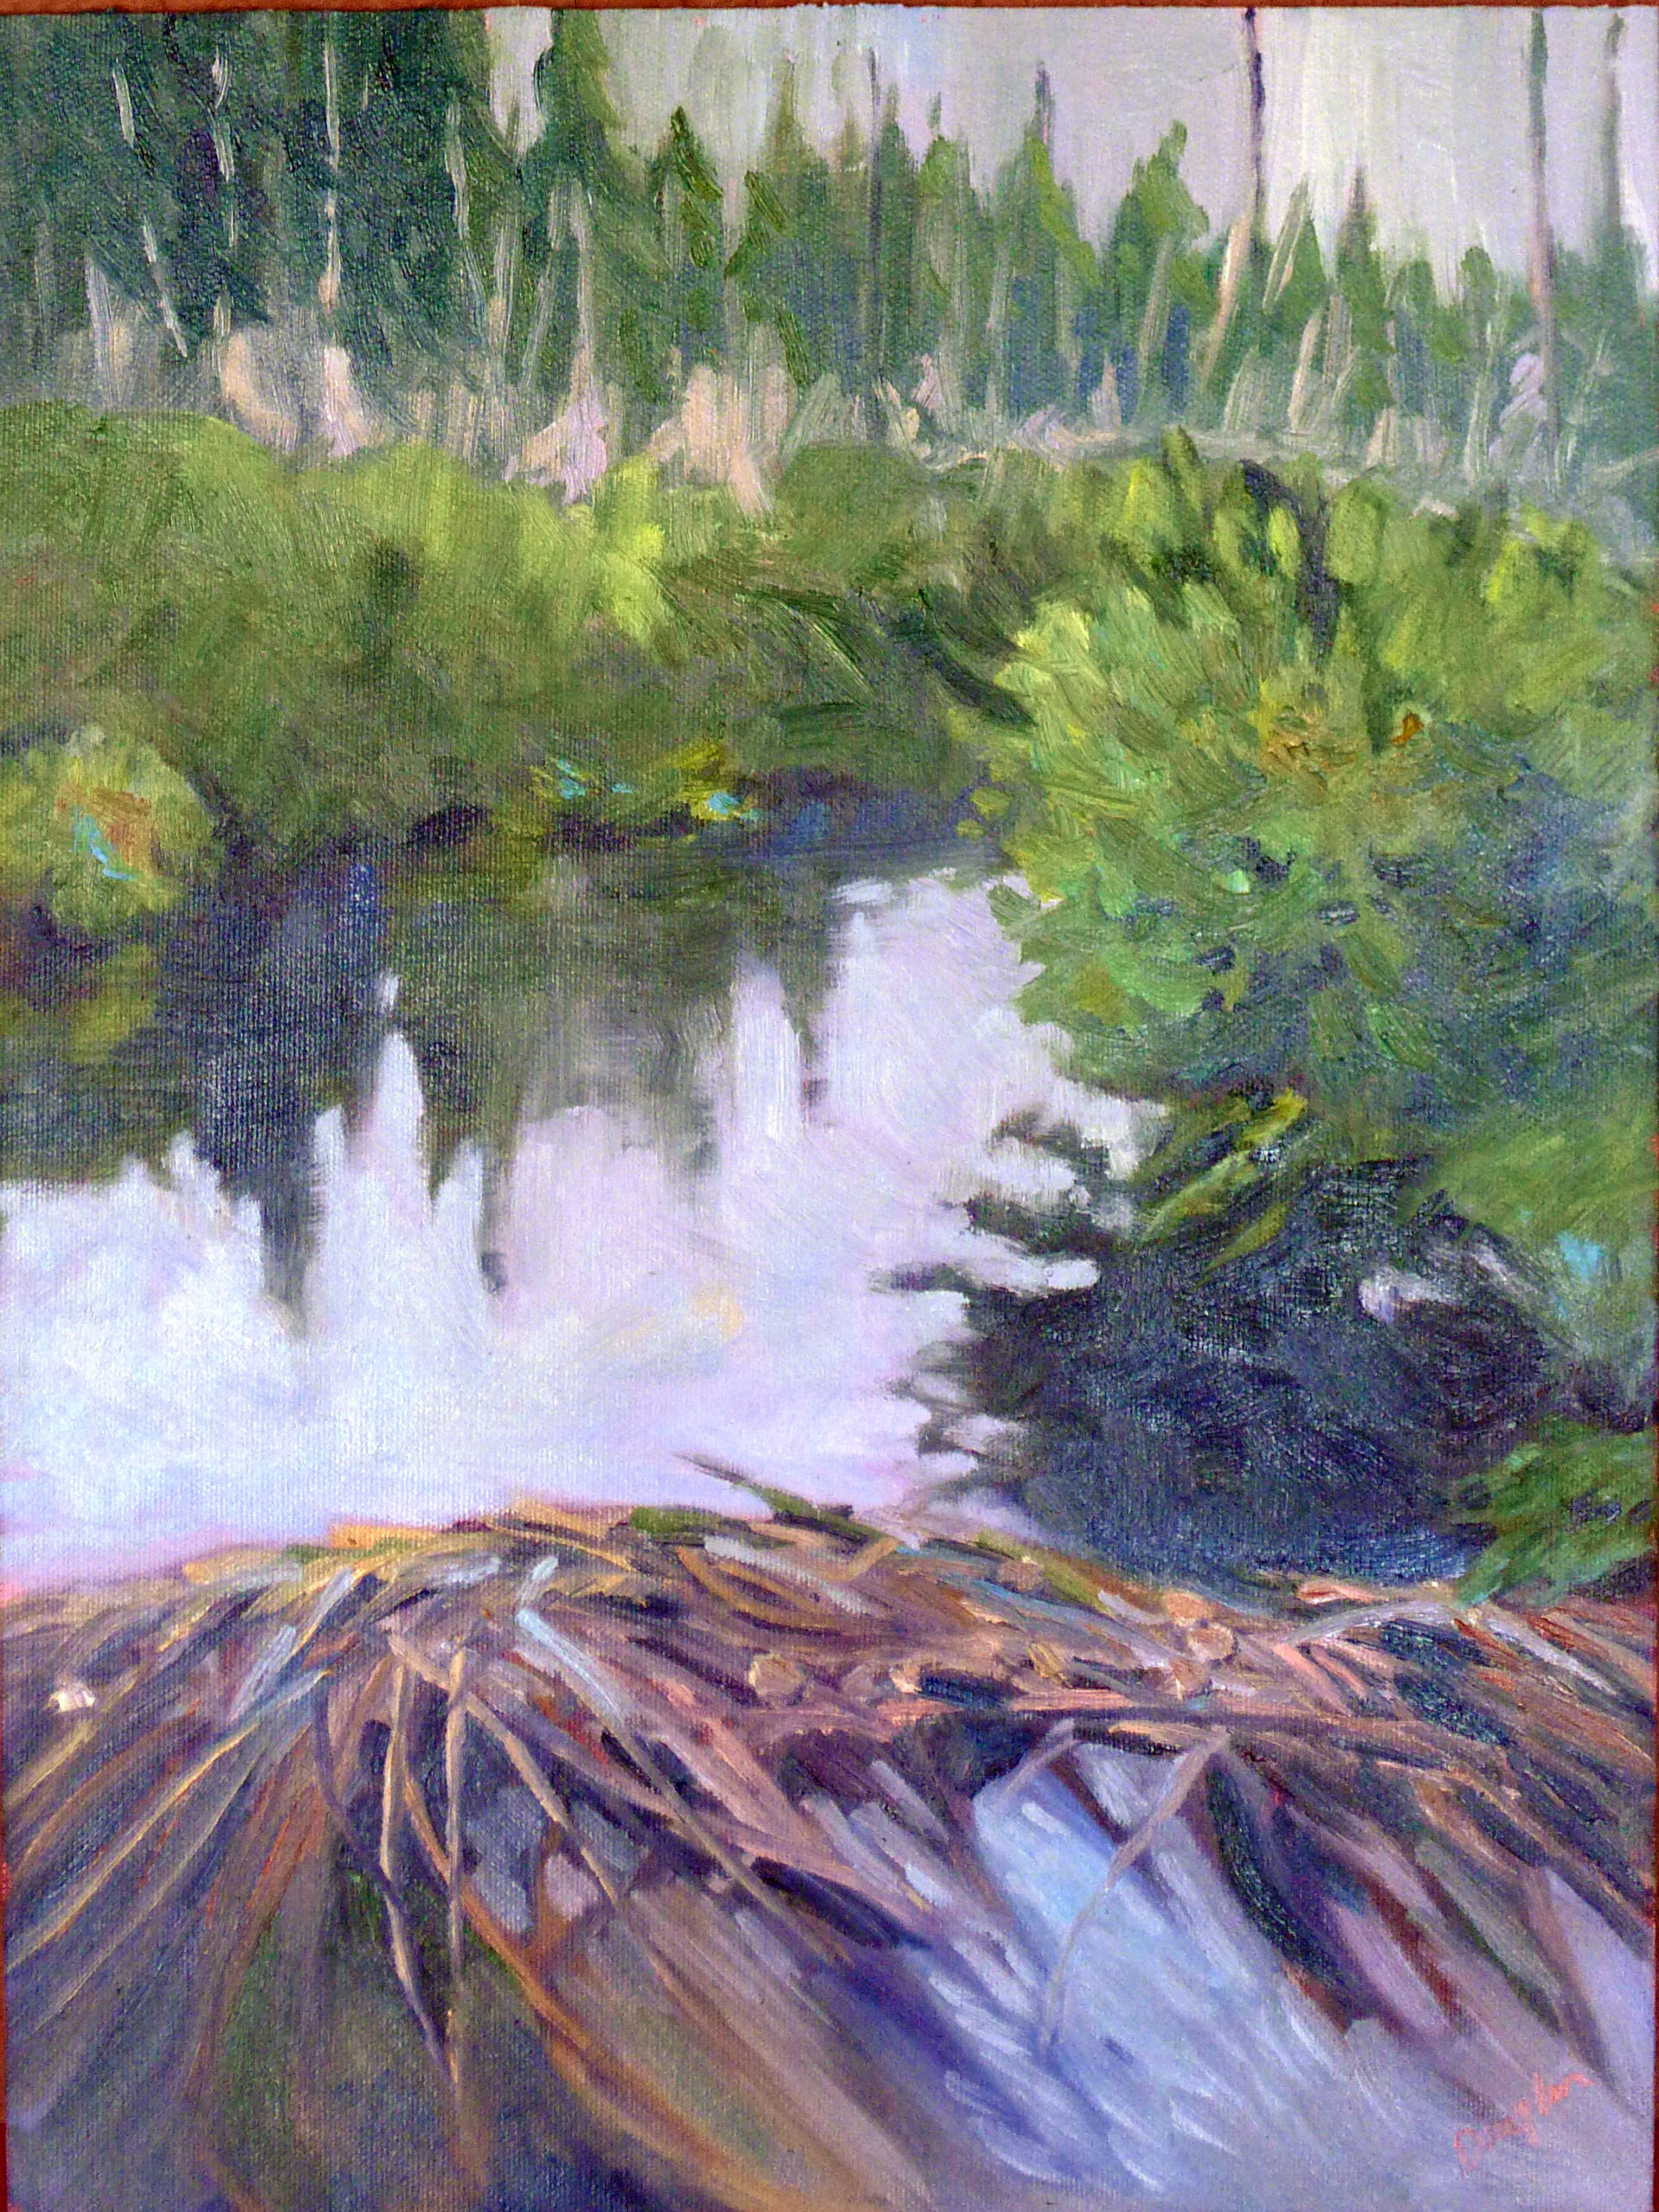 Quebec Brook, oil on archival canvasboard, $1449 framed includes shipping and handling in continental US.